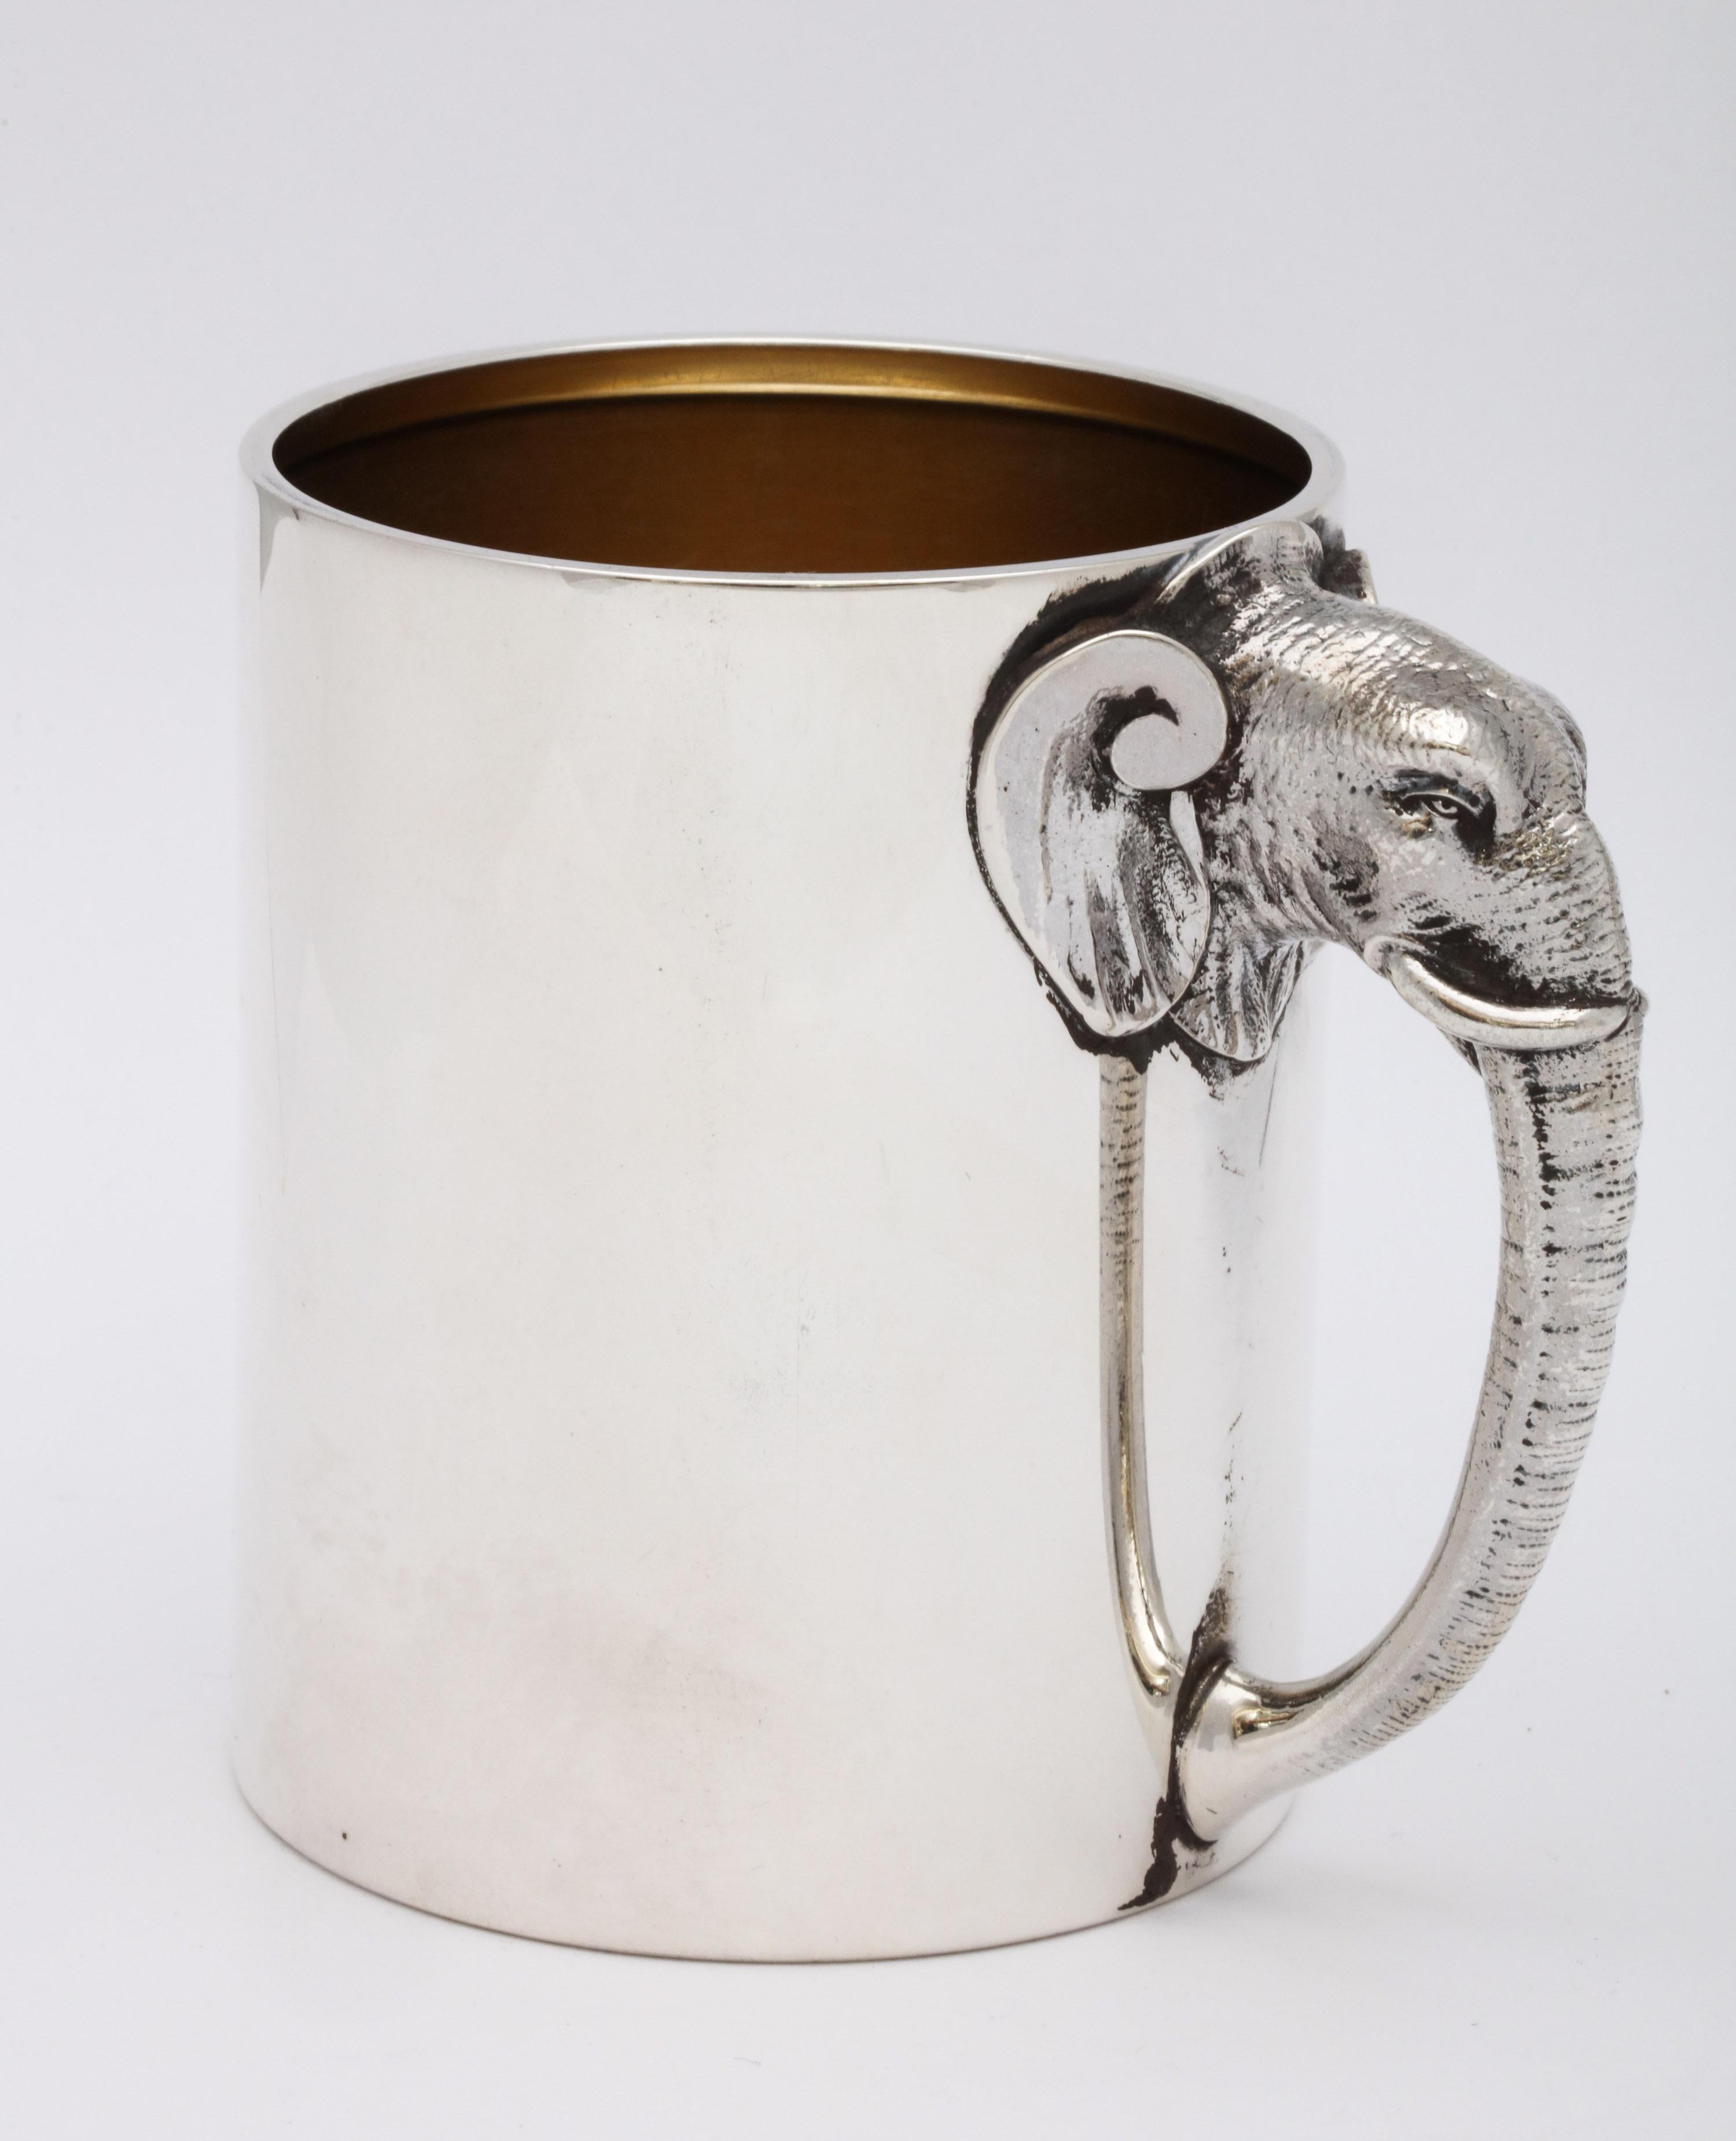 Rare, unusual, Victorian sterling silver mug/cup with elephant-form handle, Gorham Manufacturing Company, Providence, Rhode Island, year hallmarked for 1882. Gilt interior. Detailed handle is in the form of an elephant's head and trunk. Measures 3